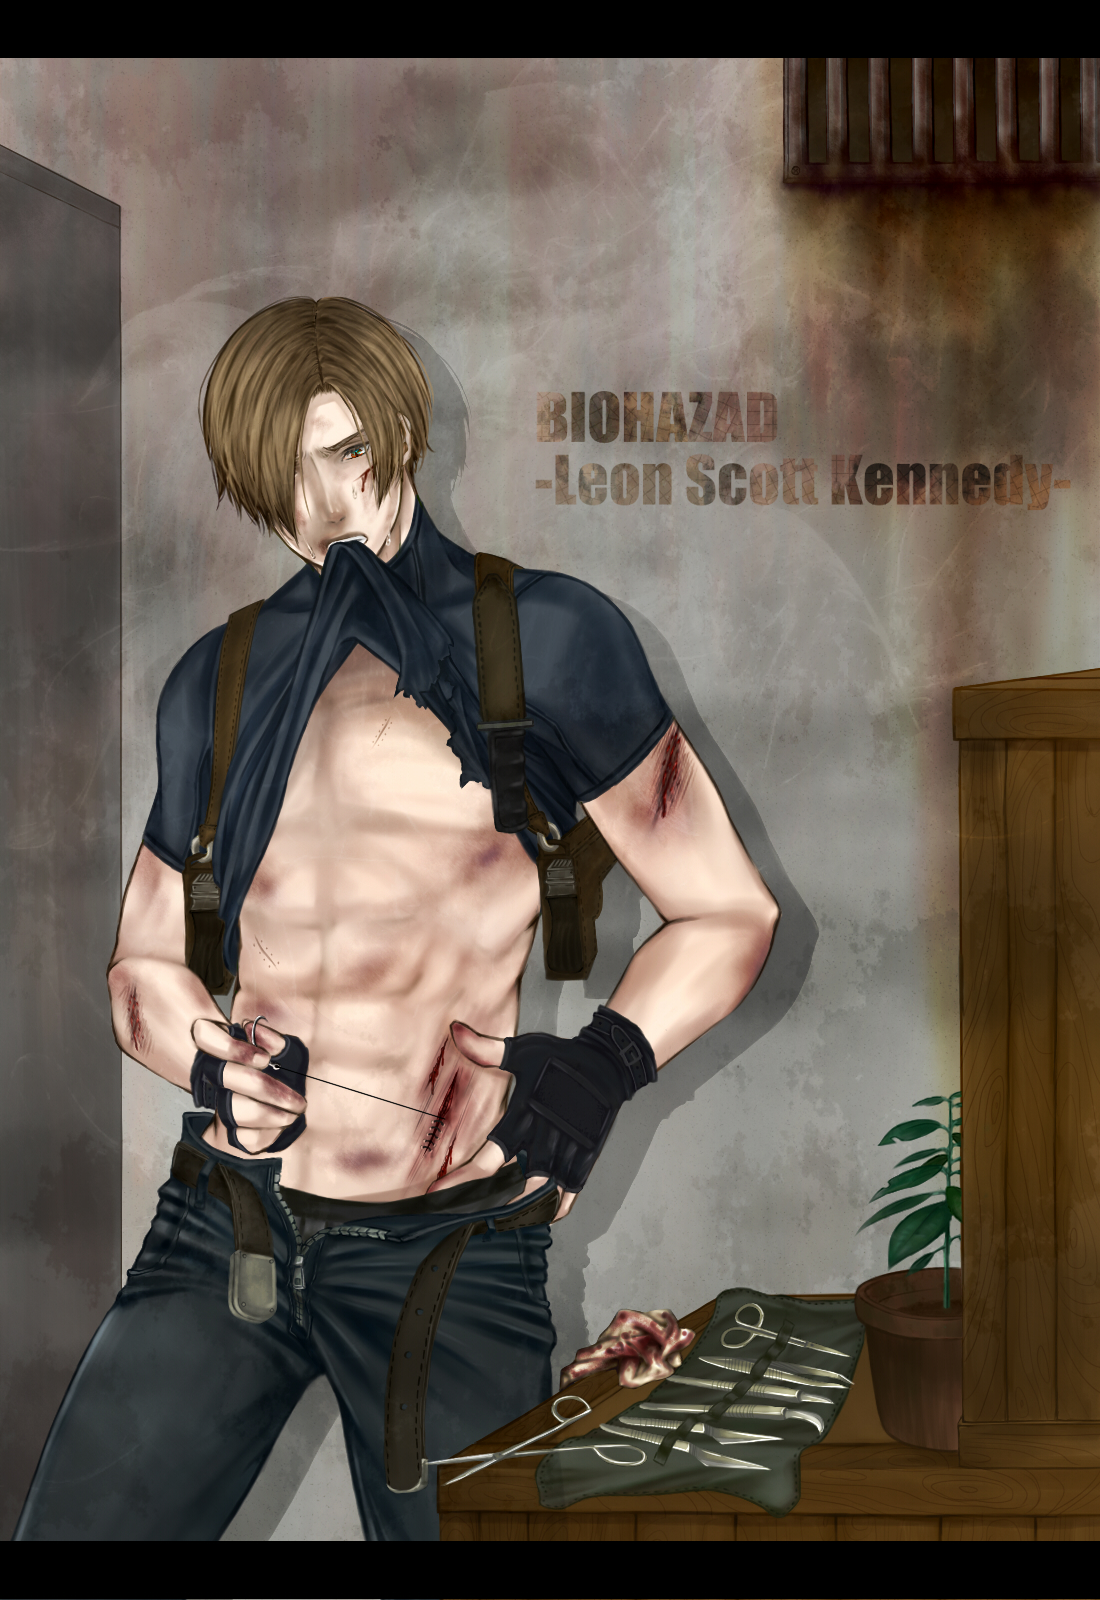 Leon S Kennedy Wallpapers